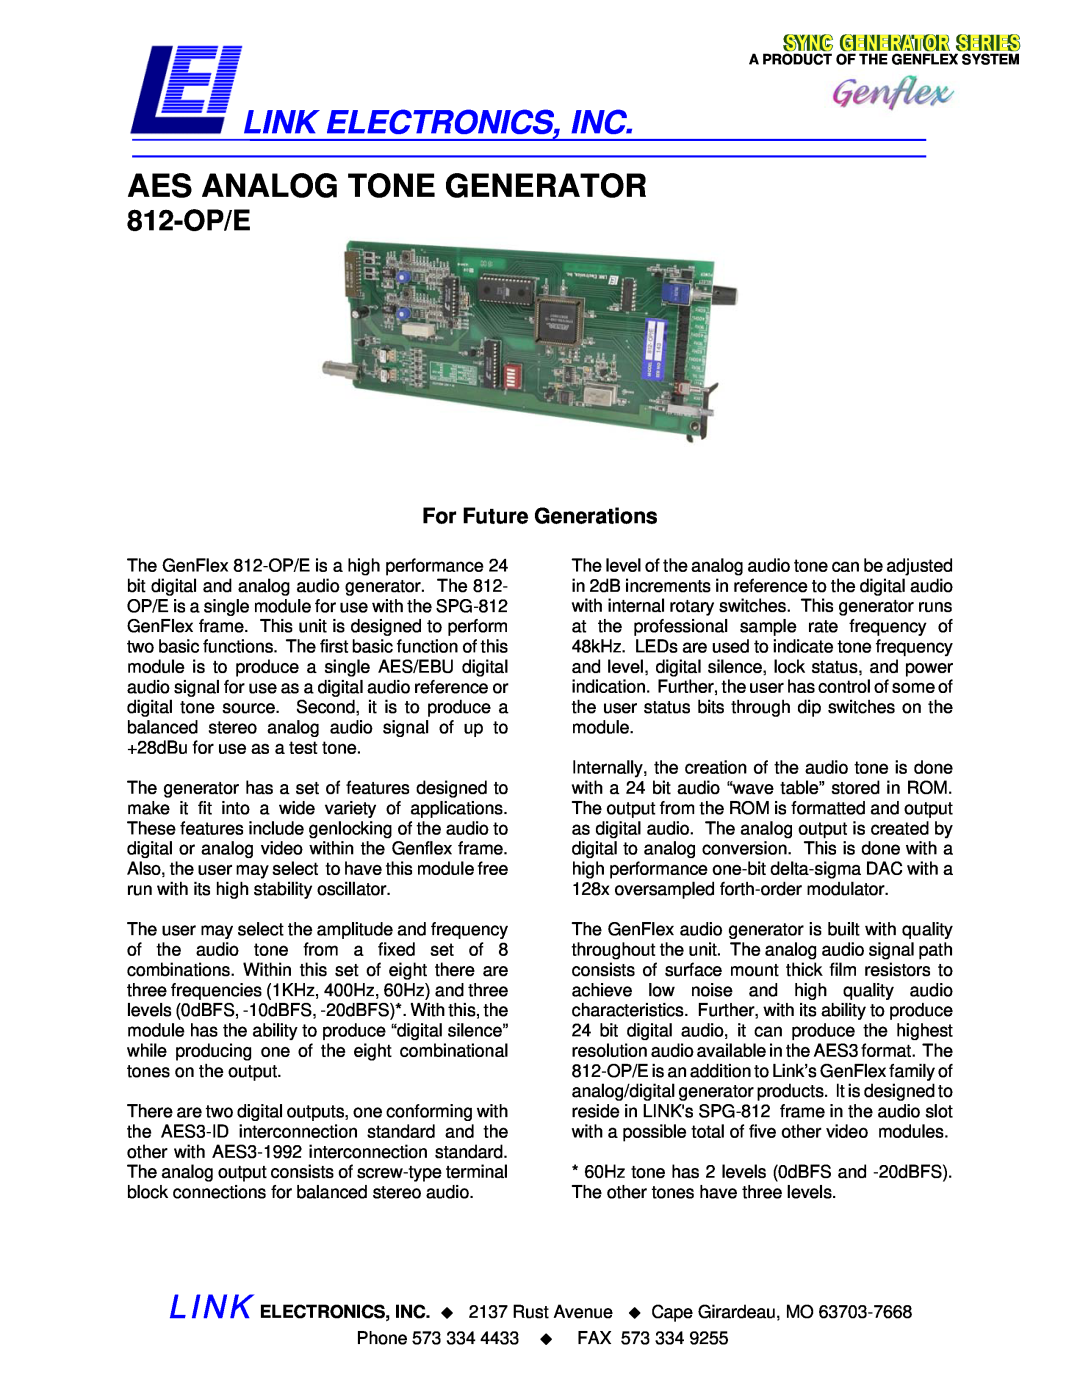 Link electronic 812-OP/E manual For Future Generations, Link Electronics, Inc, Aes Analog Tone Generator 